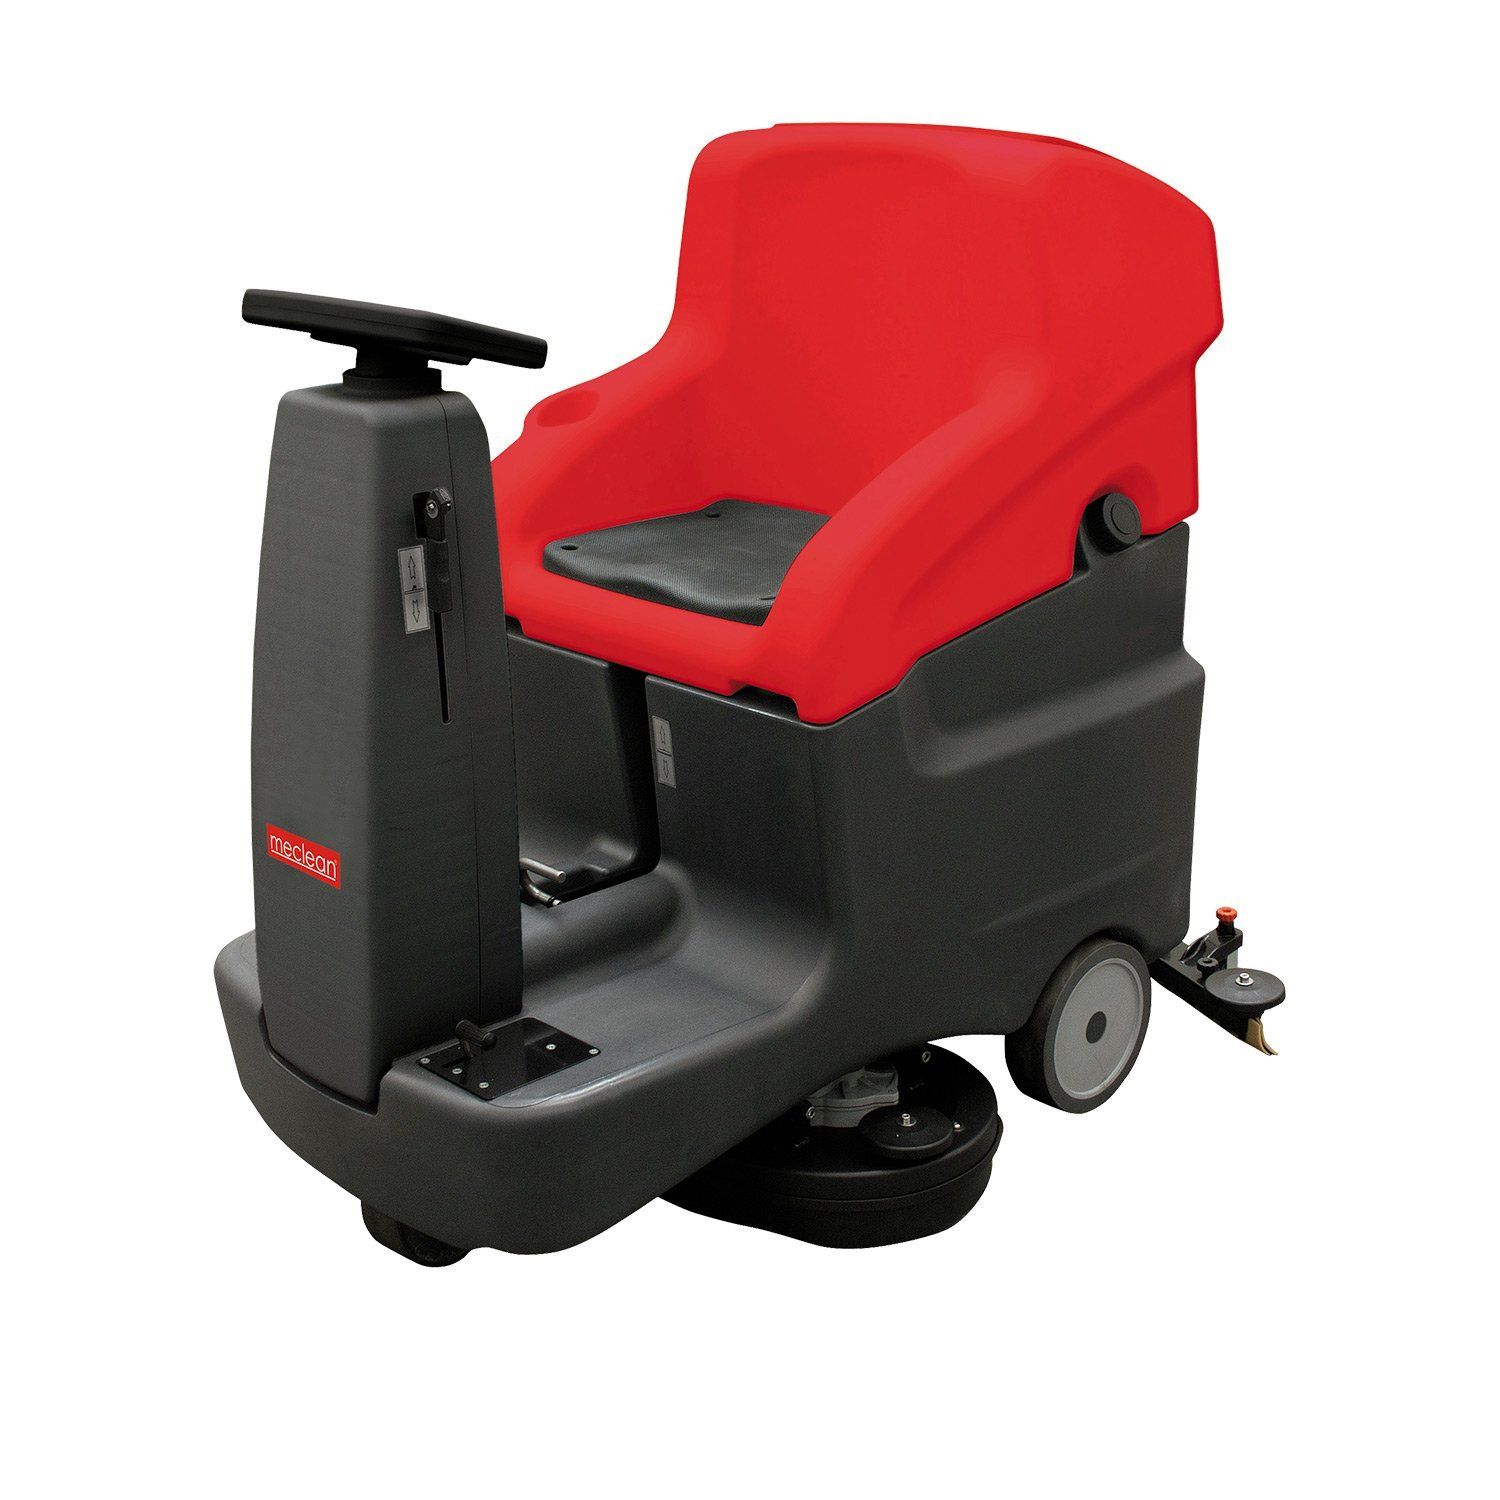 Meclean professional industrial ride-on scrubber-dryer battery powered drive POWERSCRUB R70D